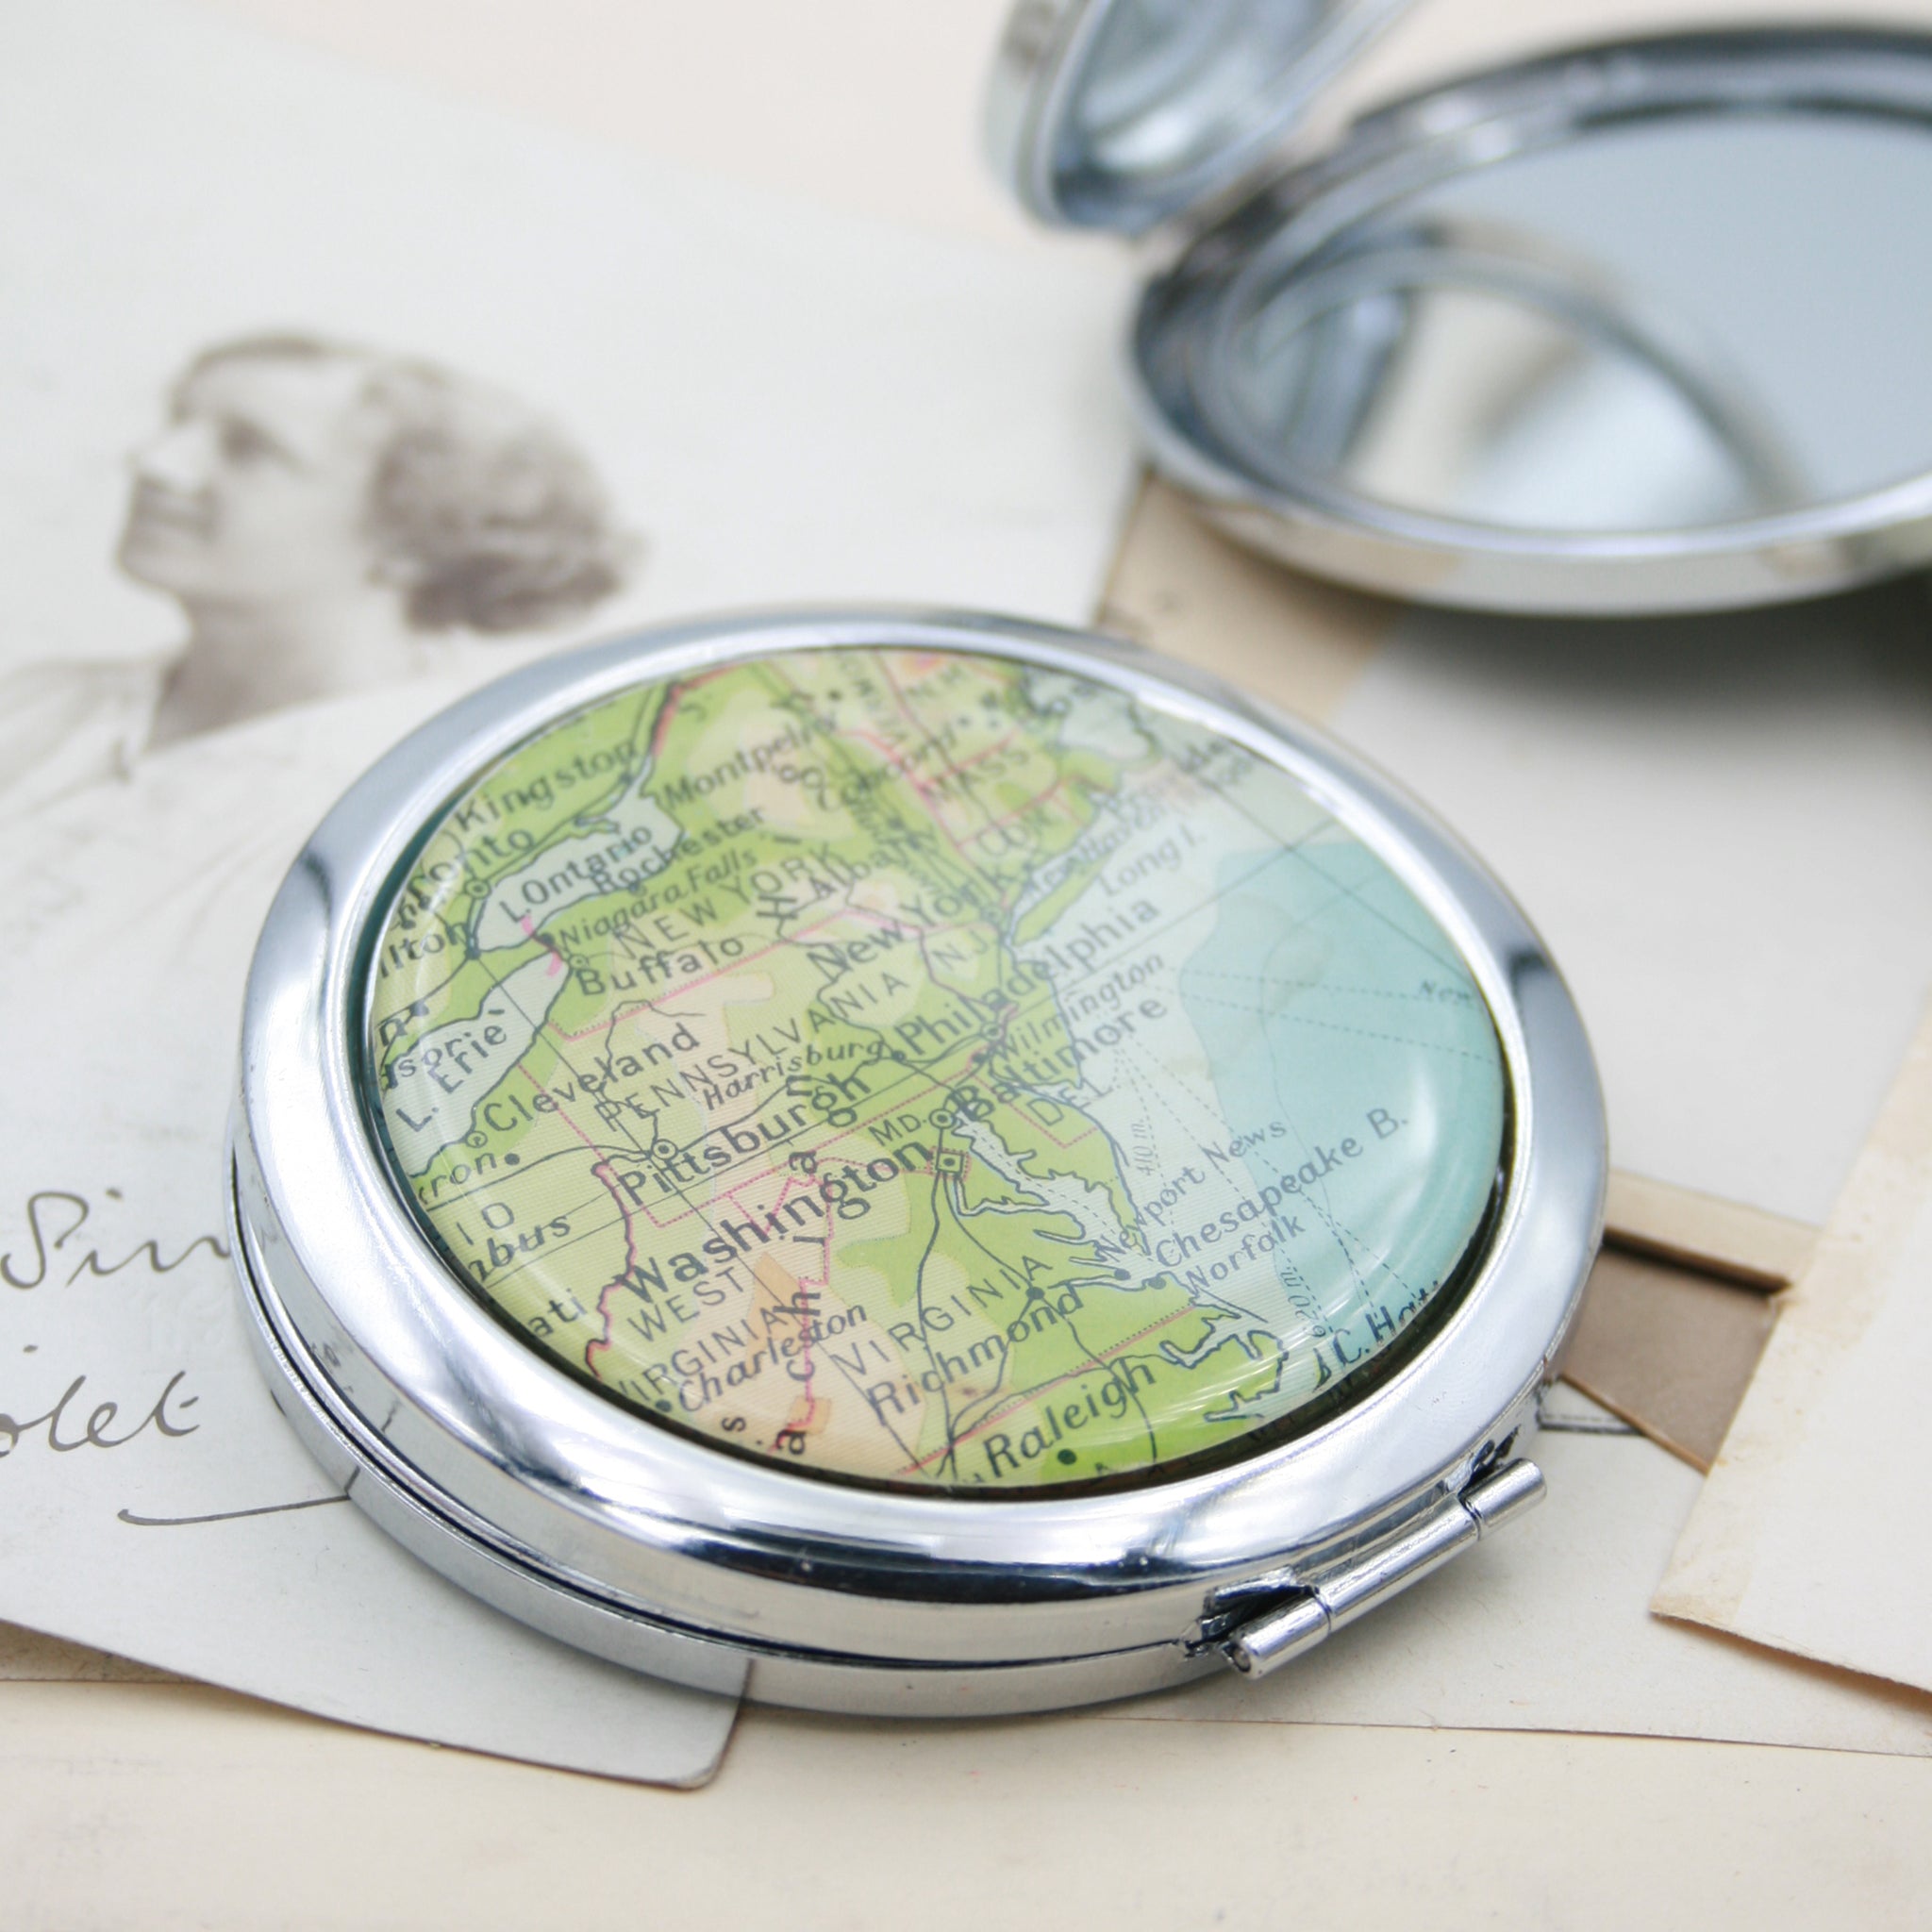 Personalised Compact Mirror in silver color featuring map of New York